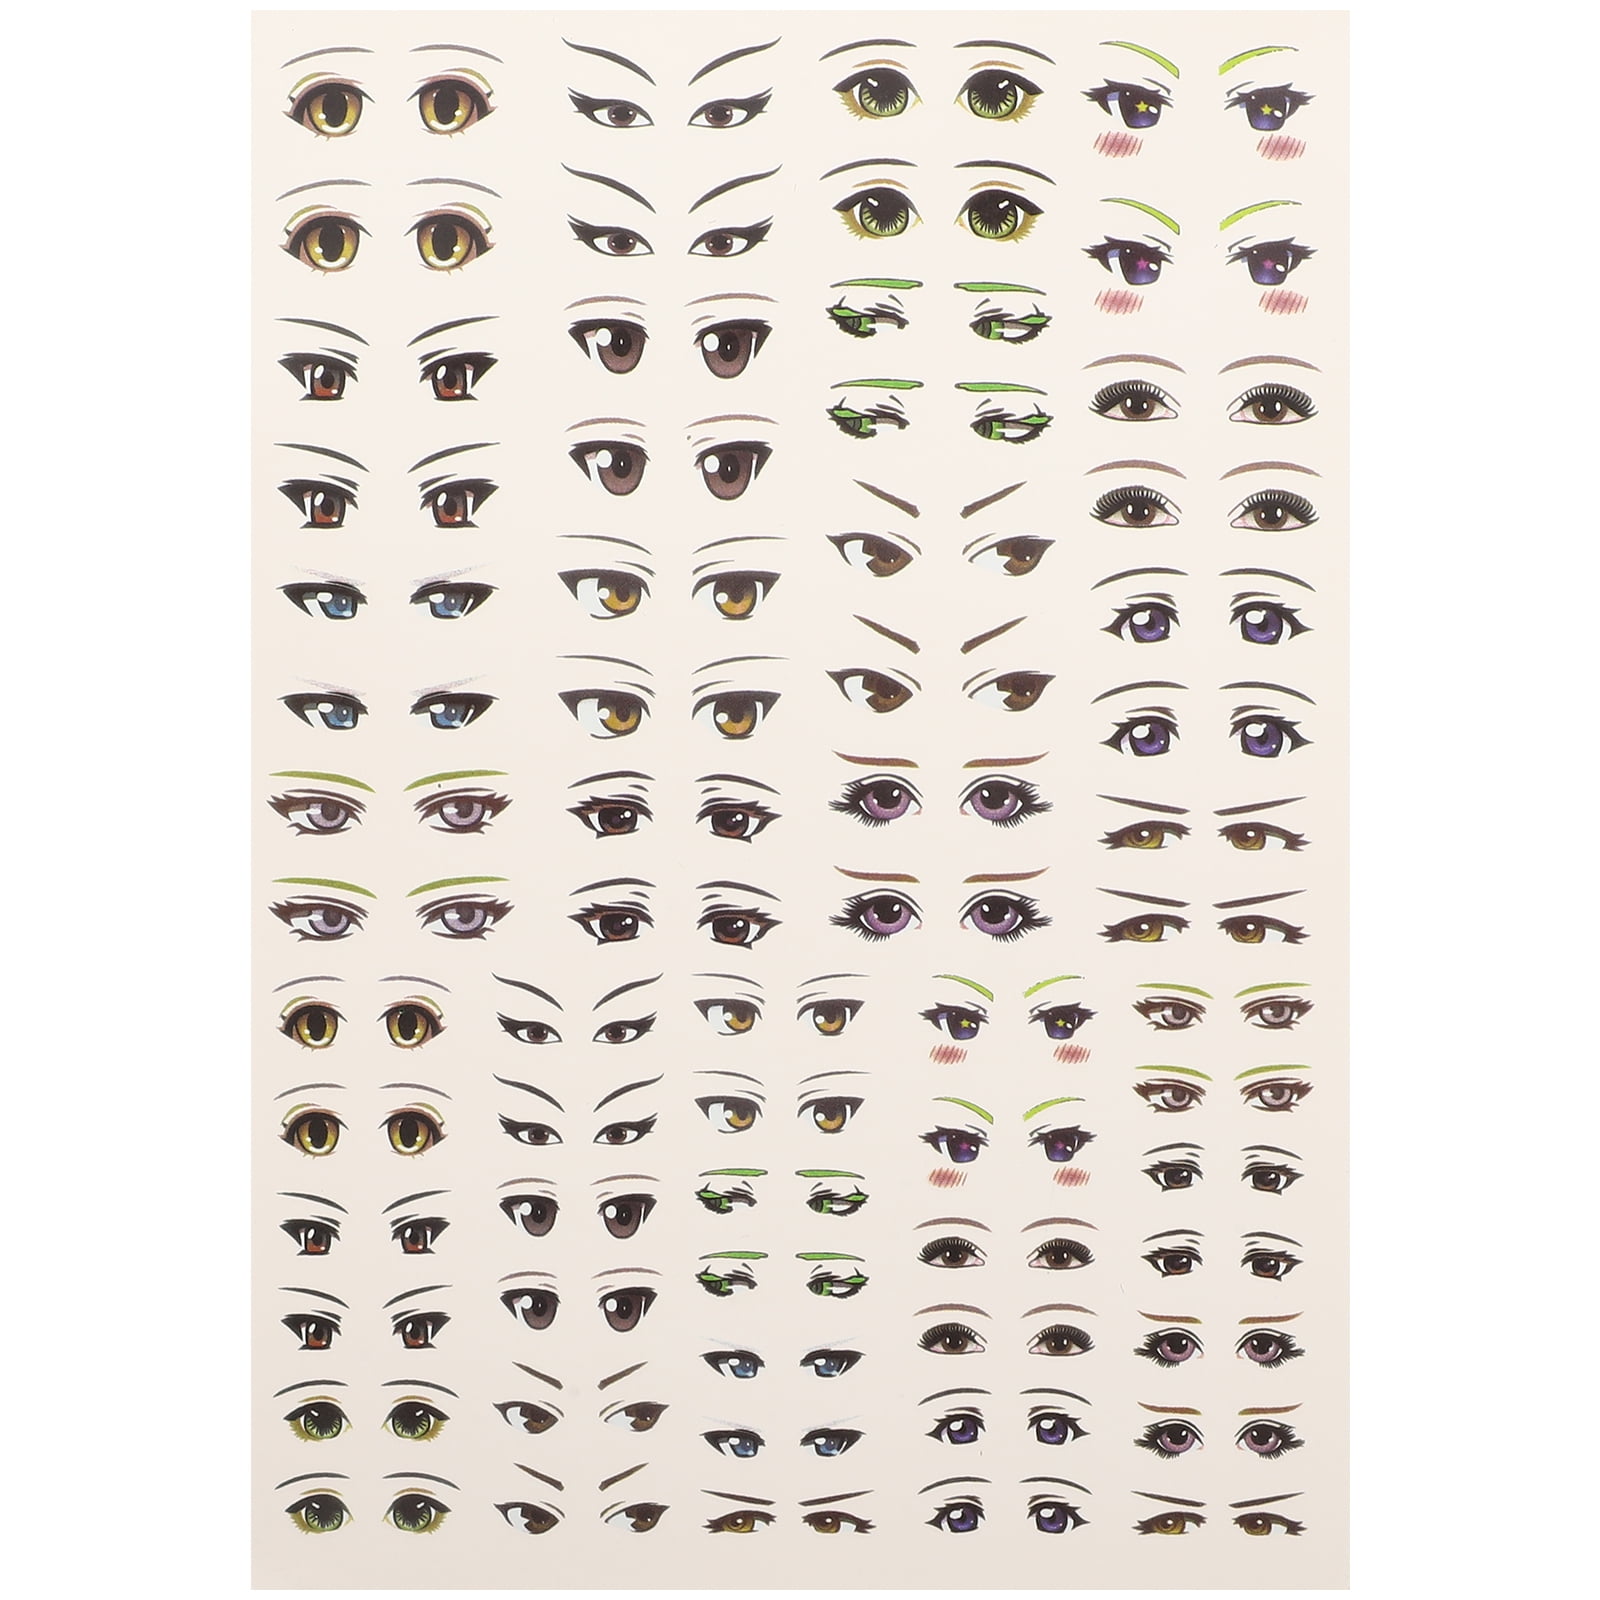 Buy Kawn 5X Light DIY Cartoon Toy Eyes Stickers Water Decals for Clay Doll  15x13cm Online at Low Prices in India  Amazonin